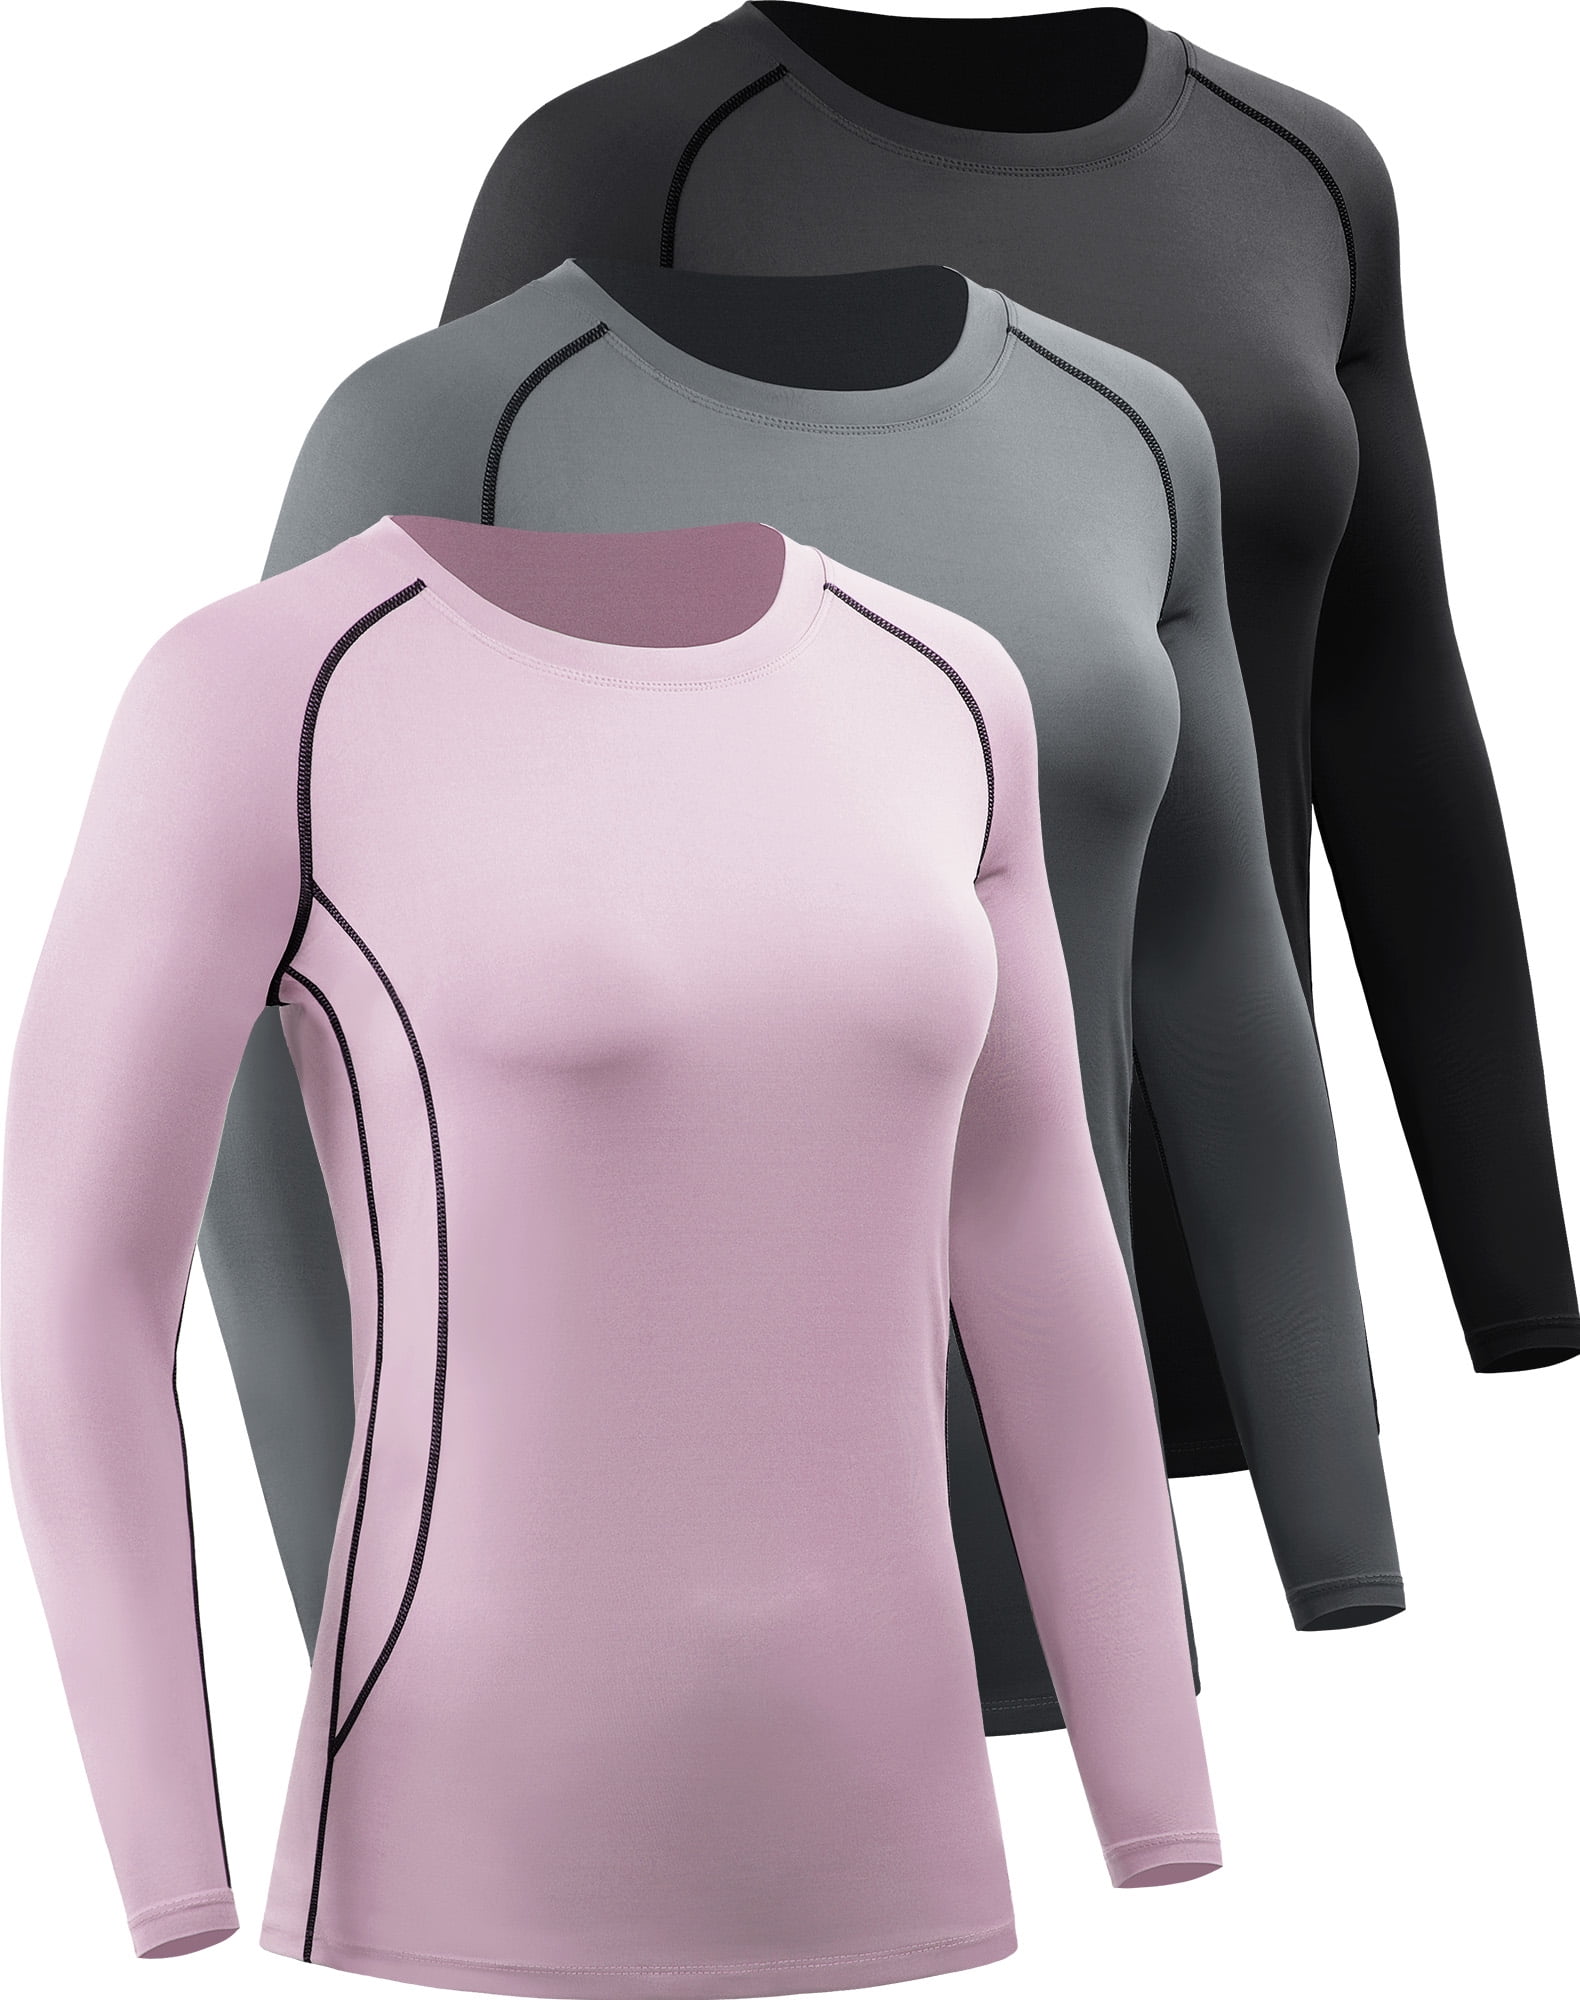 Cadmus Women's Compression Long Sleeve Shirts for Running Hiking Tights, 3  Pack, Black & Grey & Dark Red, XL 